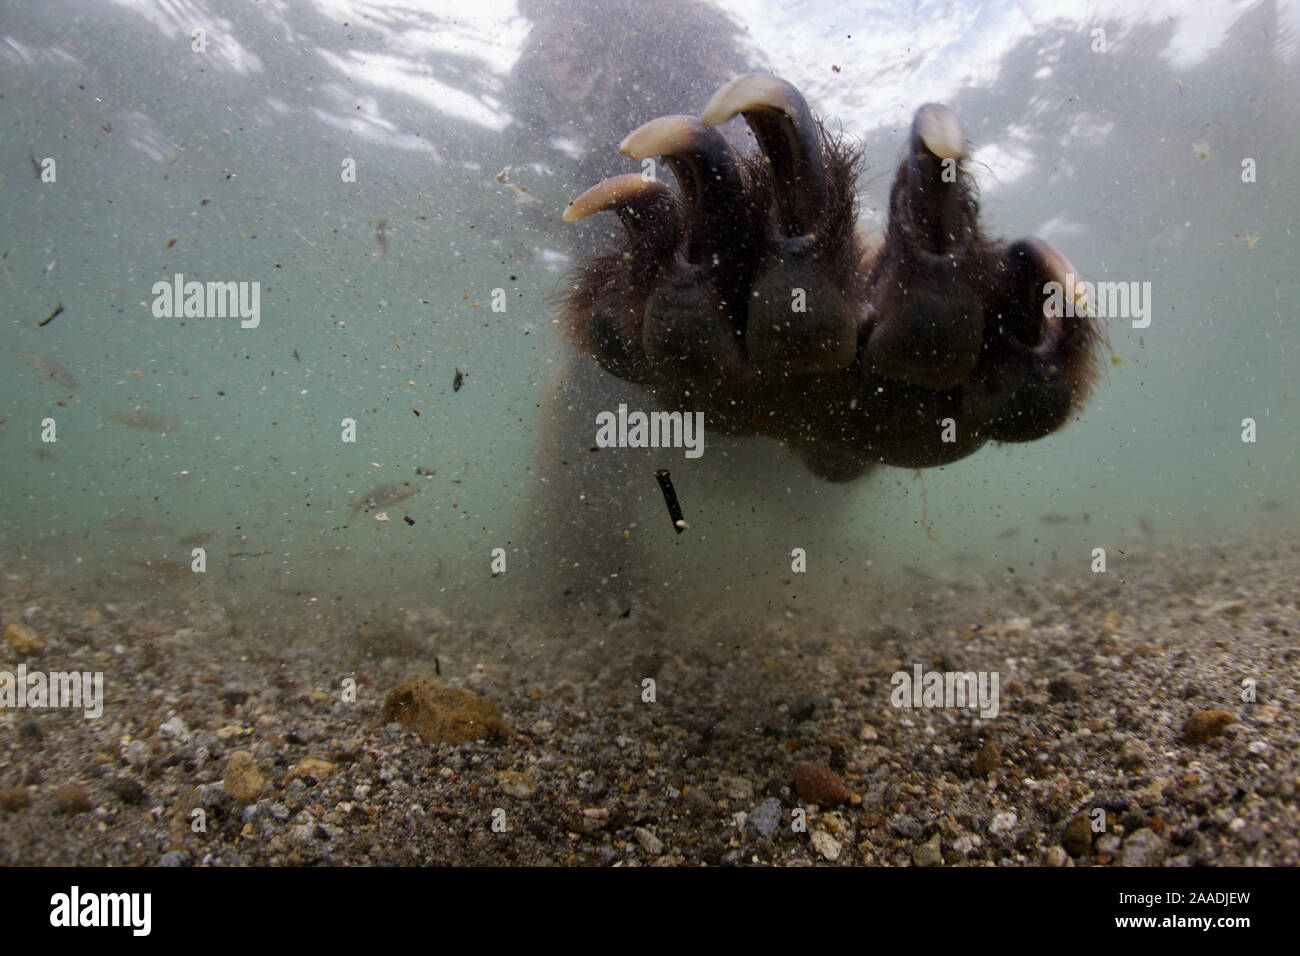 Underwater view of Brown bear (Ursus arctos) paw fishing for Sockeye salmon (Oncorhynchus nerka) with paw outstretched. Ozernaya River, Kuril Lake, South Kamtchatka Sanctuary, Far East Russia. August. Stock Photo